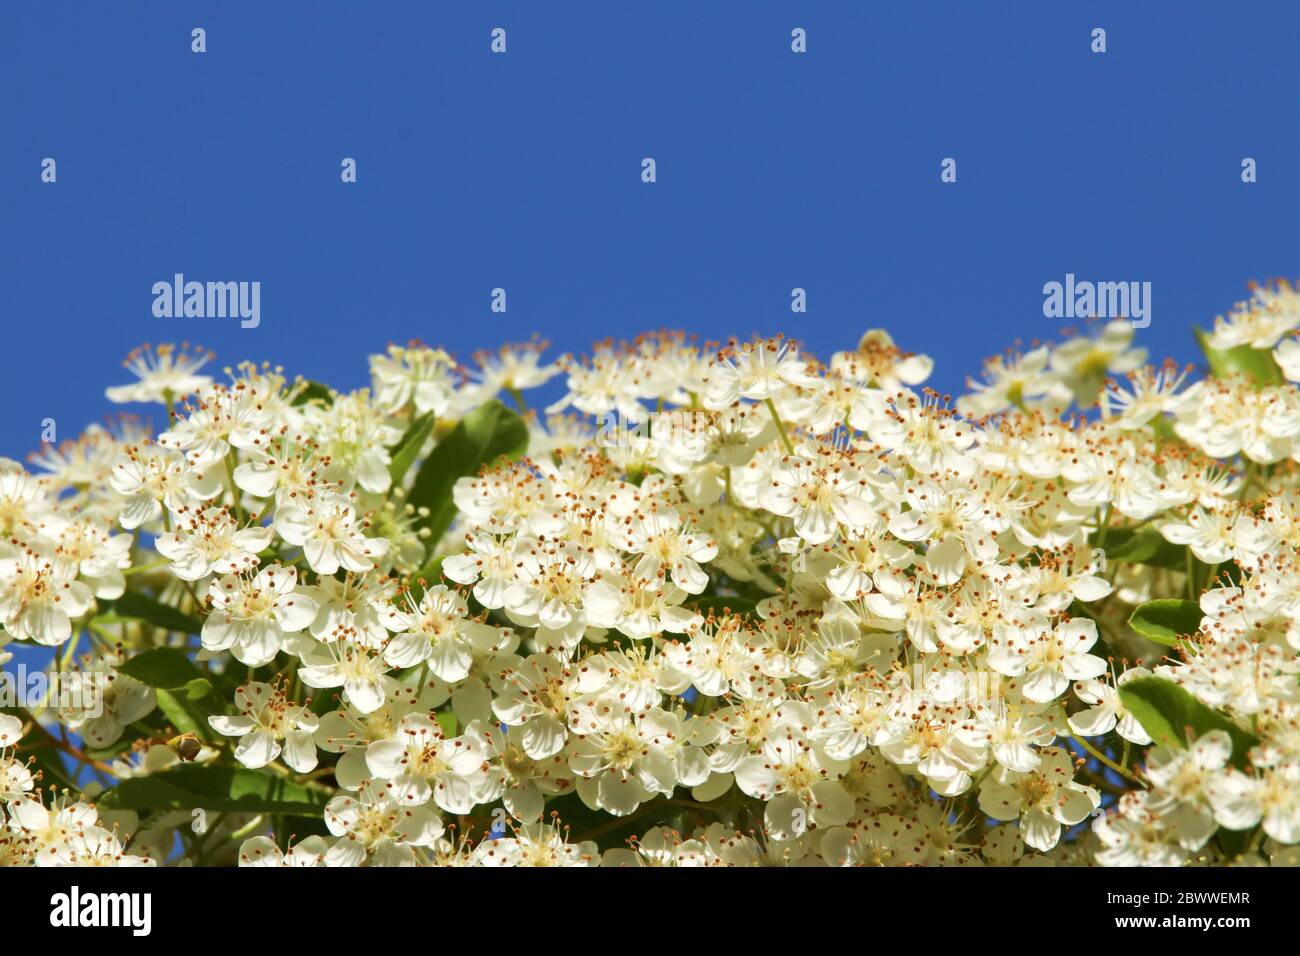 Flowering Firethorn, Pyracantha, in spring against a blue sky Stock Photo